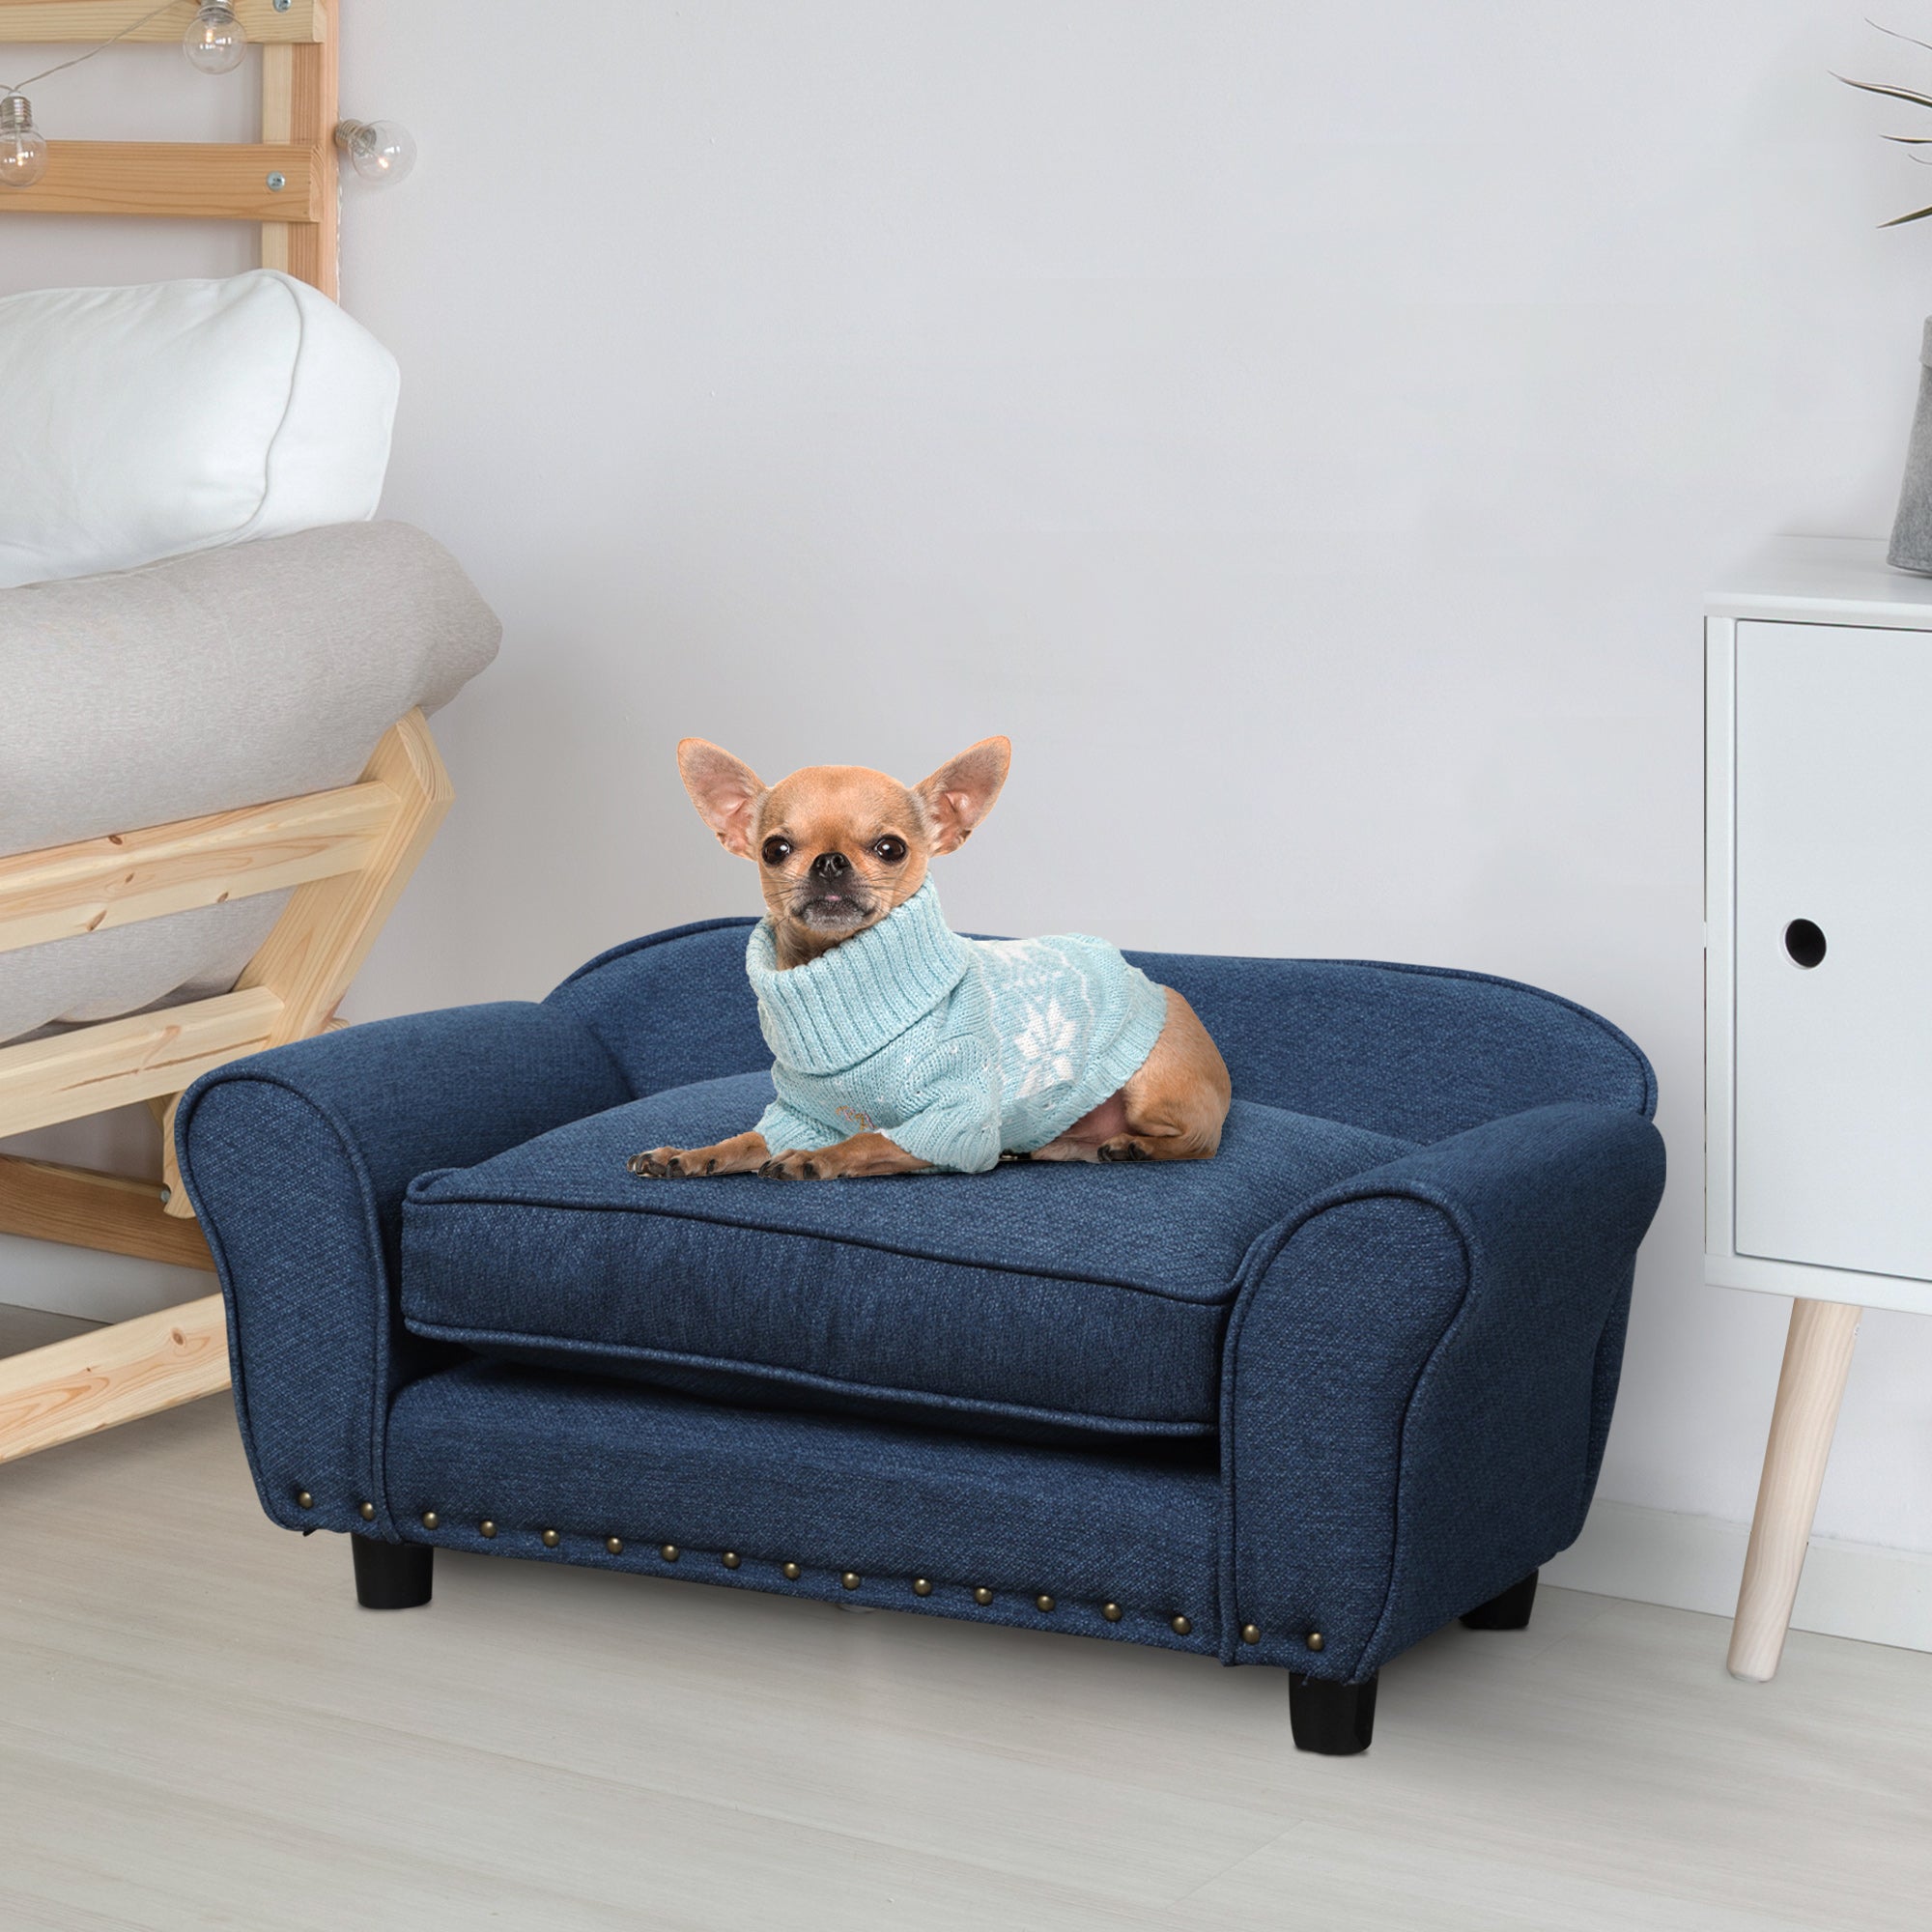 PawHut Dog Sofa for XS and S Size Dogs, Pet Chair Couch with Thick Sponge Padded Cushion, Kitten Lounge Bed with Washable Cover, Wooden Frame - Blue